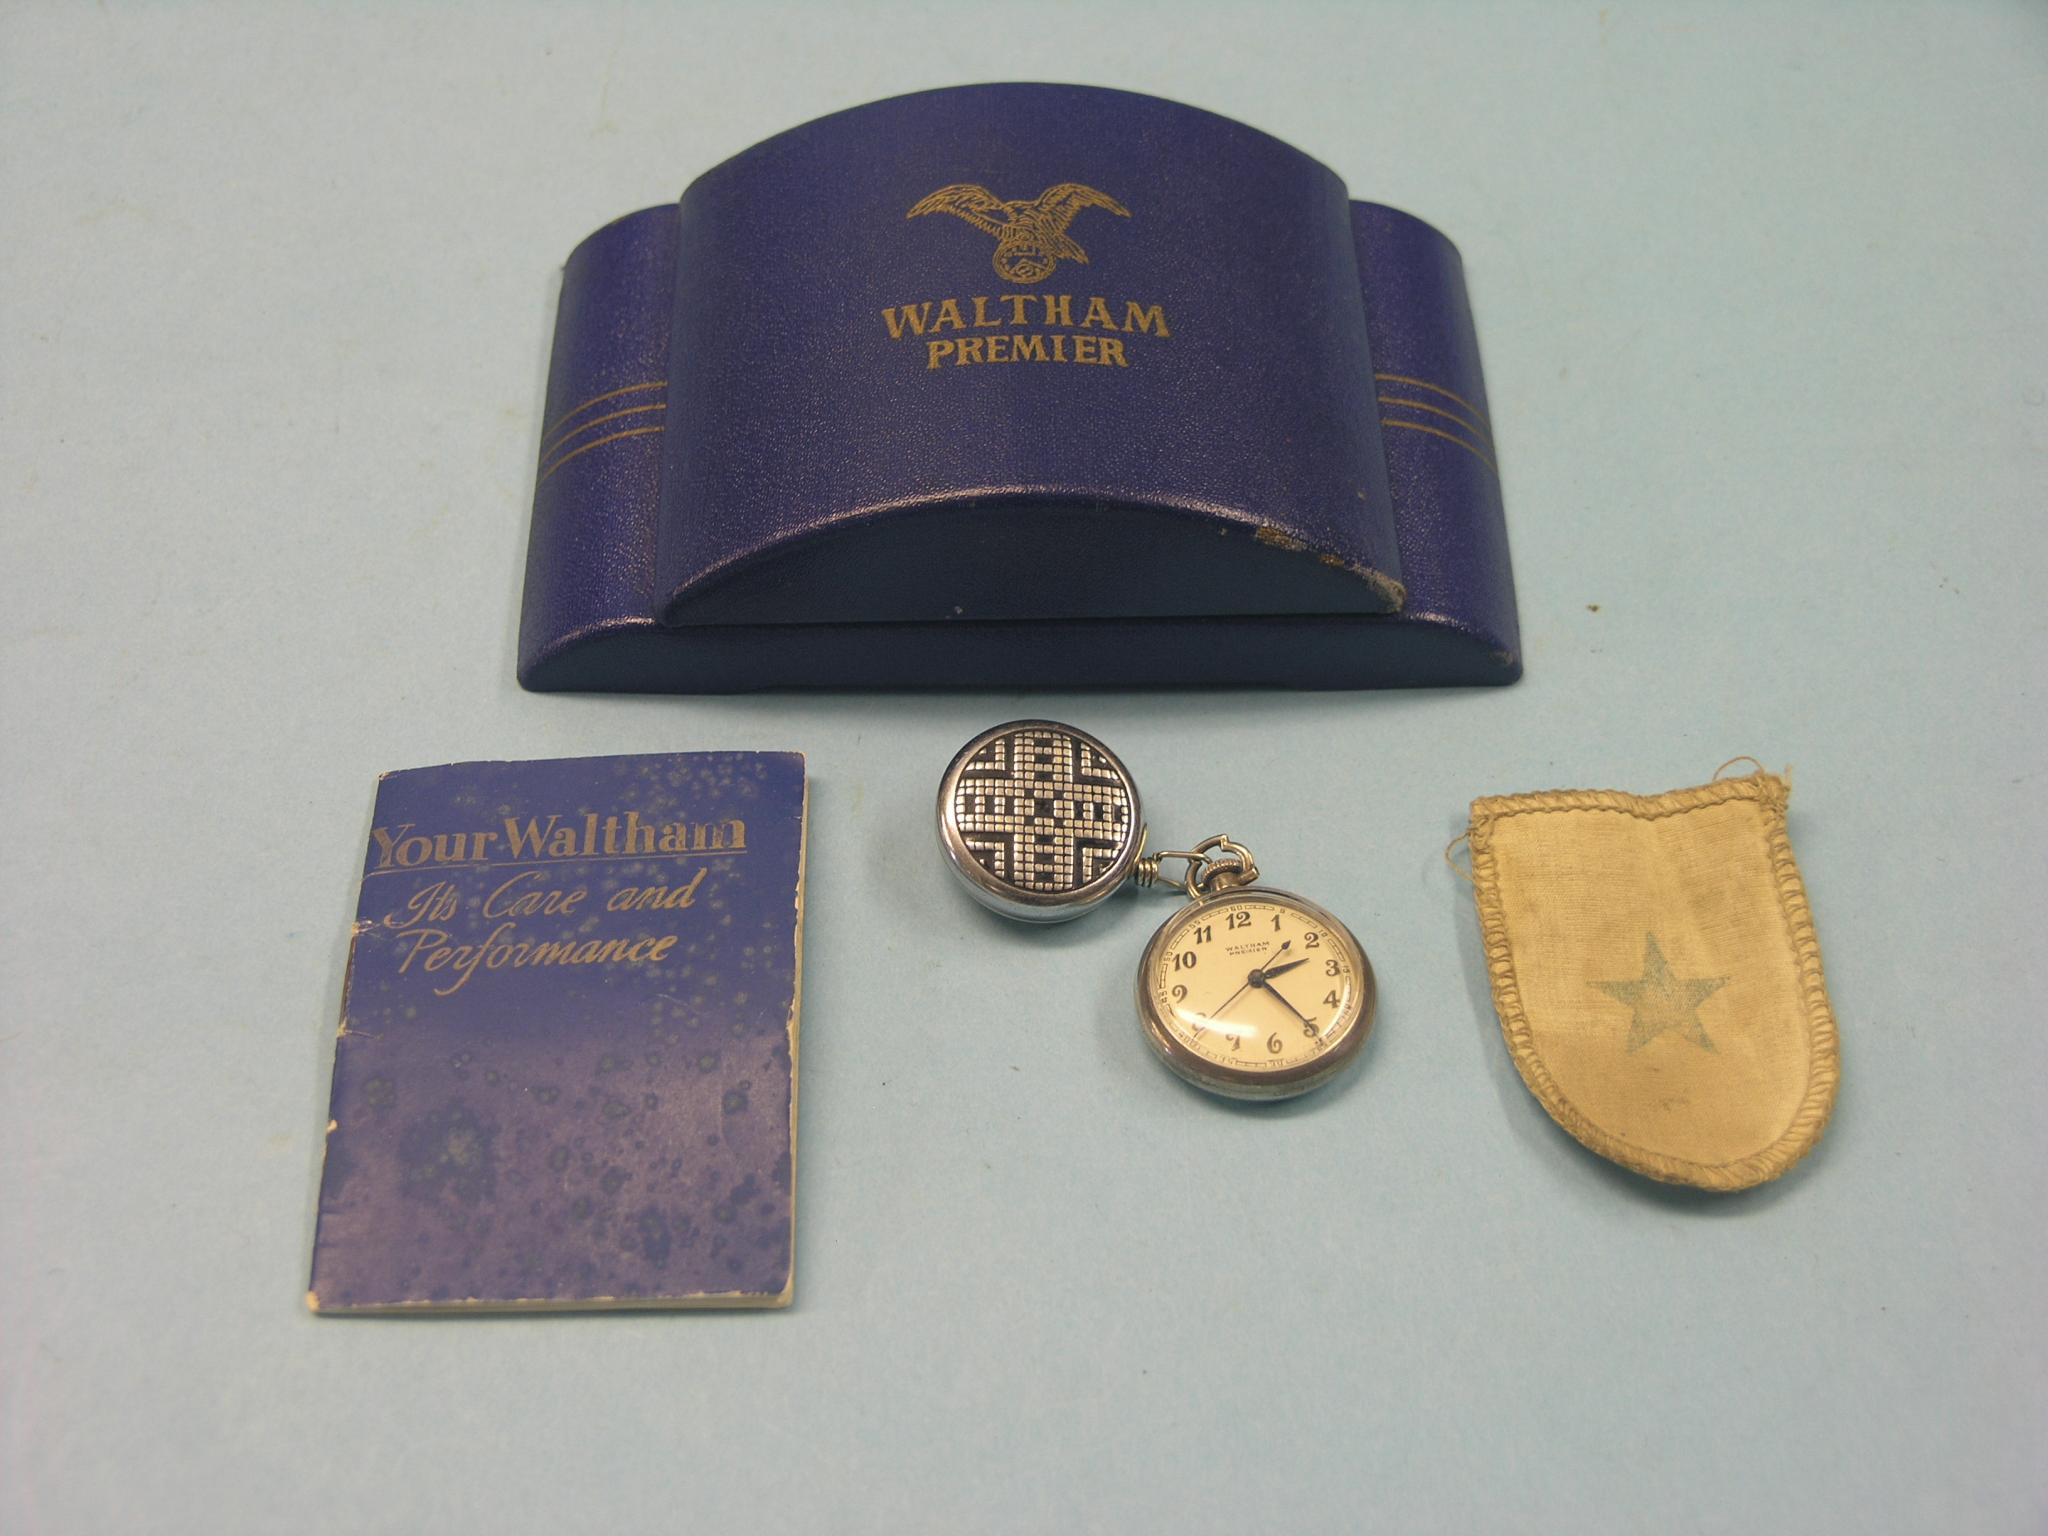 A Waltham Premier lady`s watch, pendant form, within original case, complete with linen pocket and